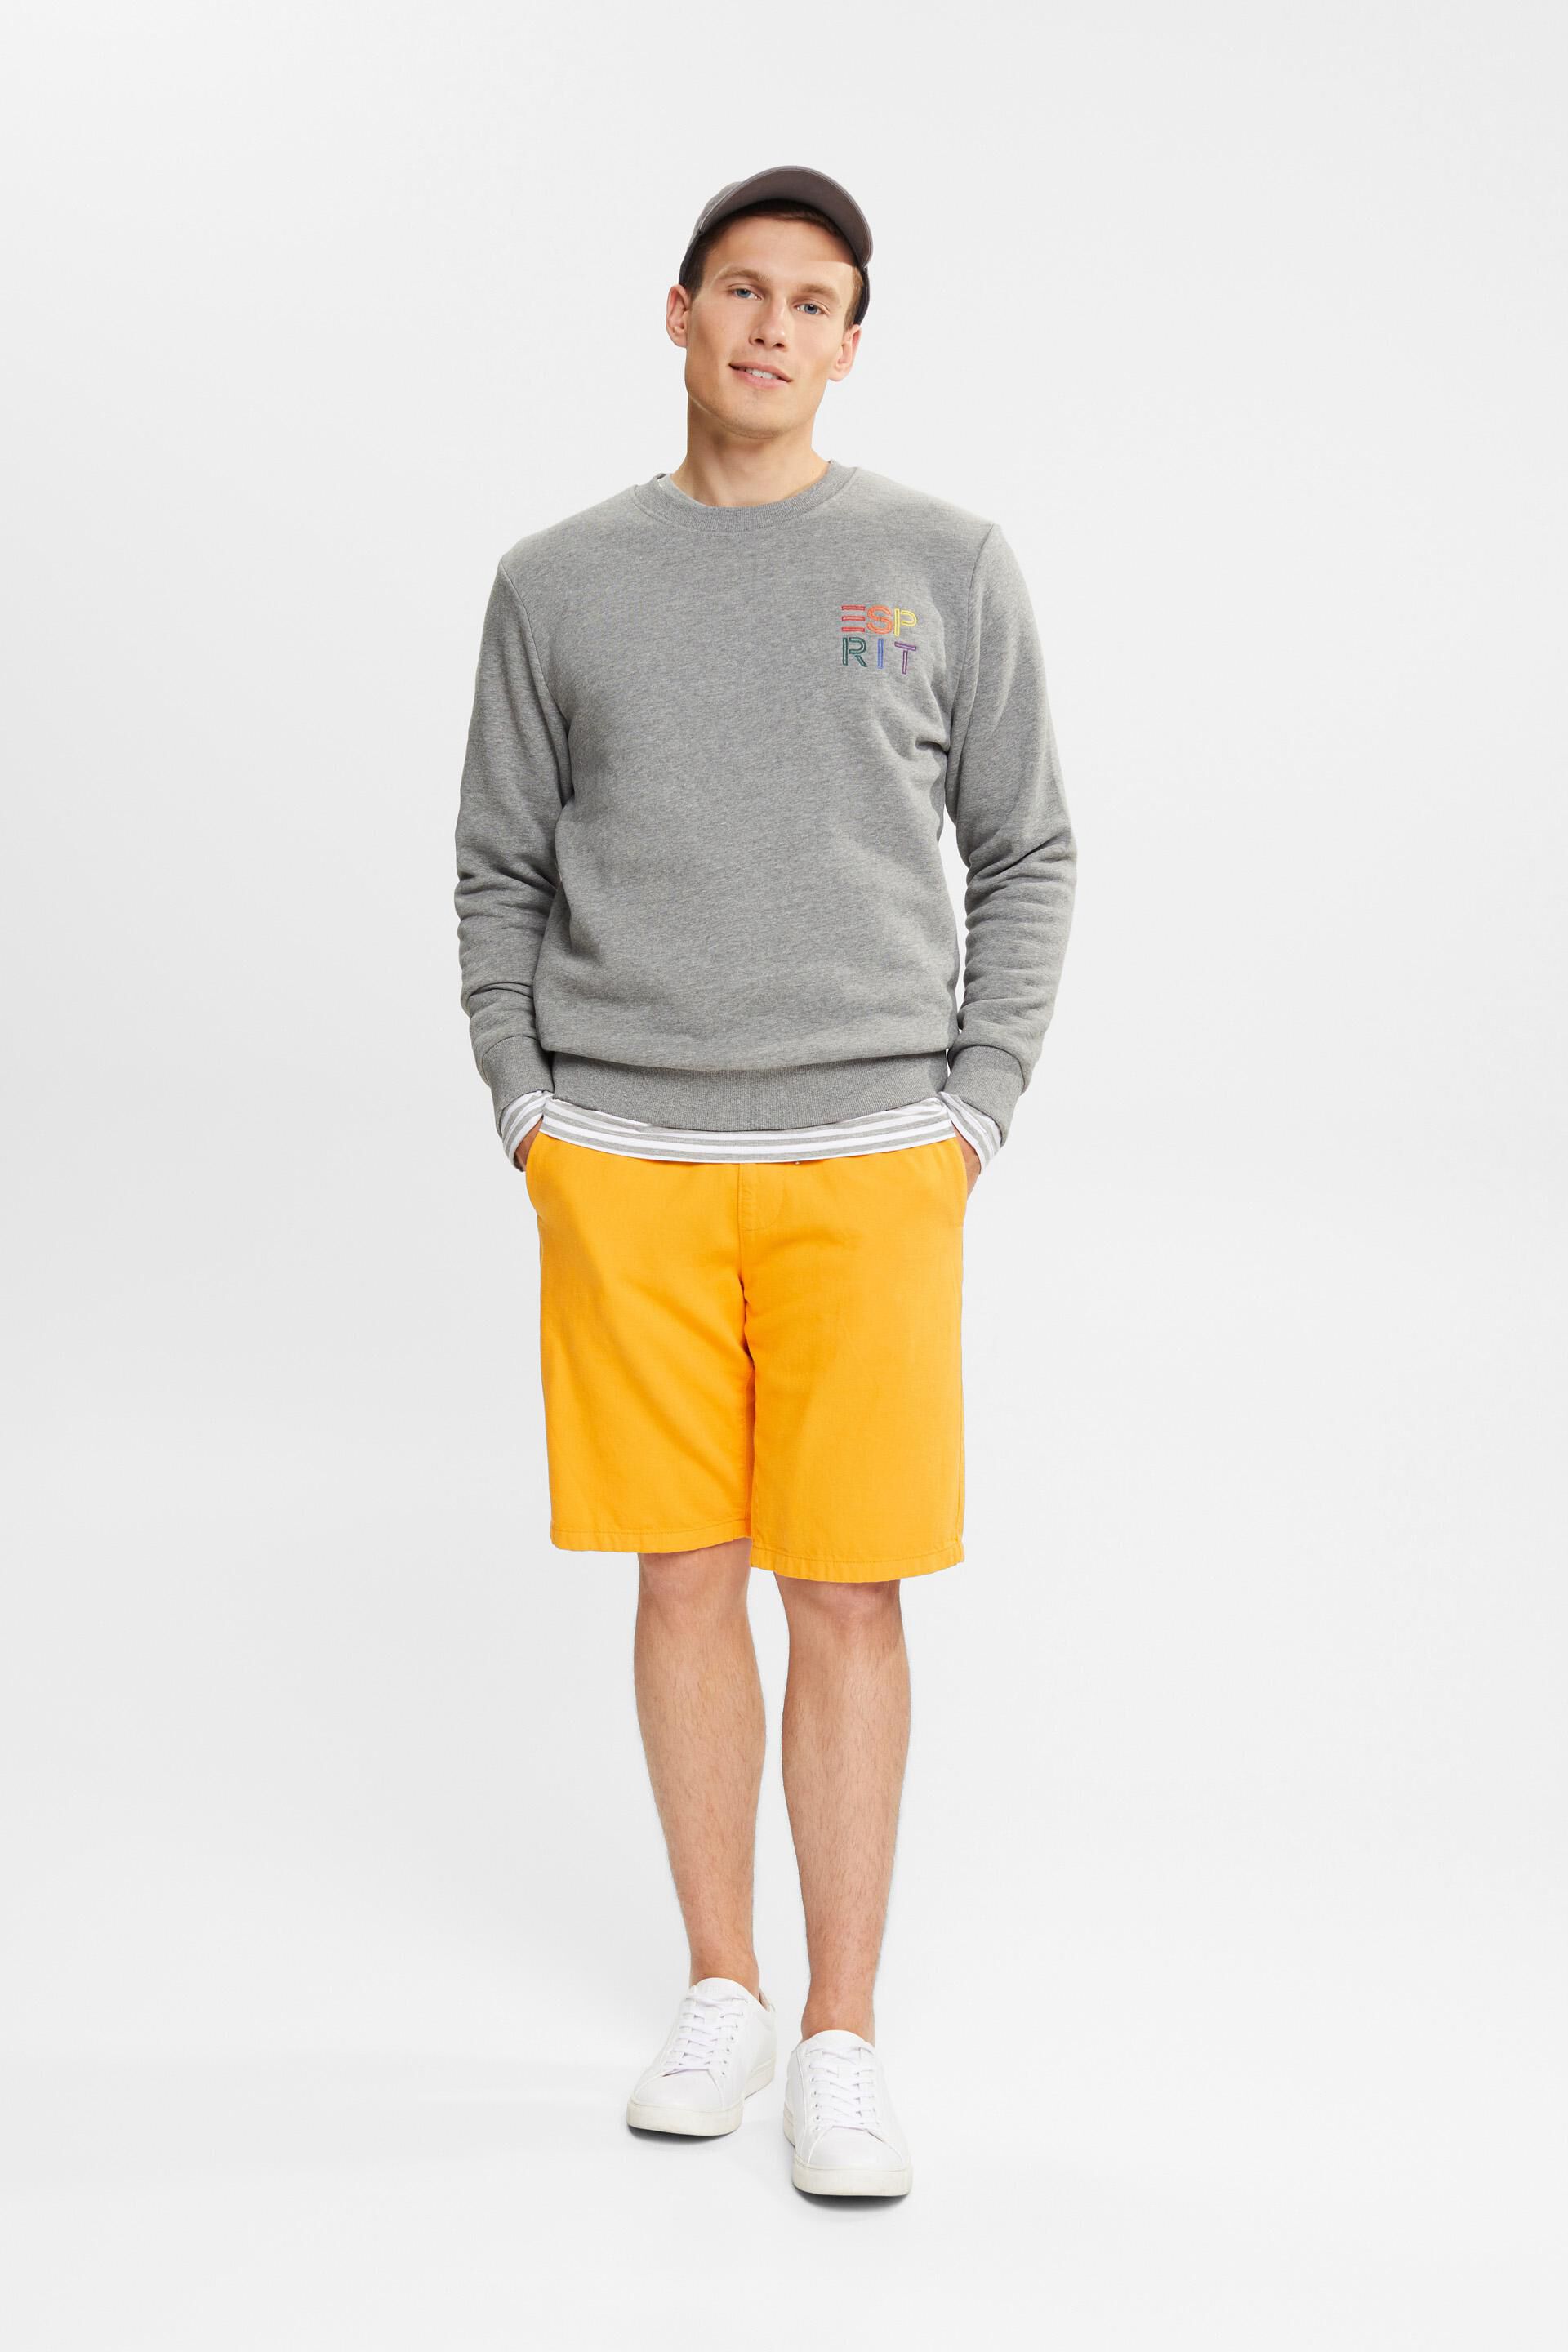 Esprit a with Sweatshirt embroidered colourful logo